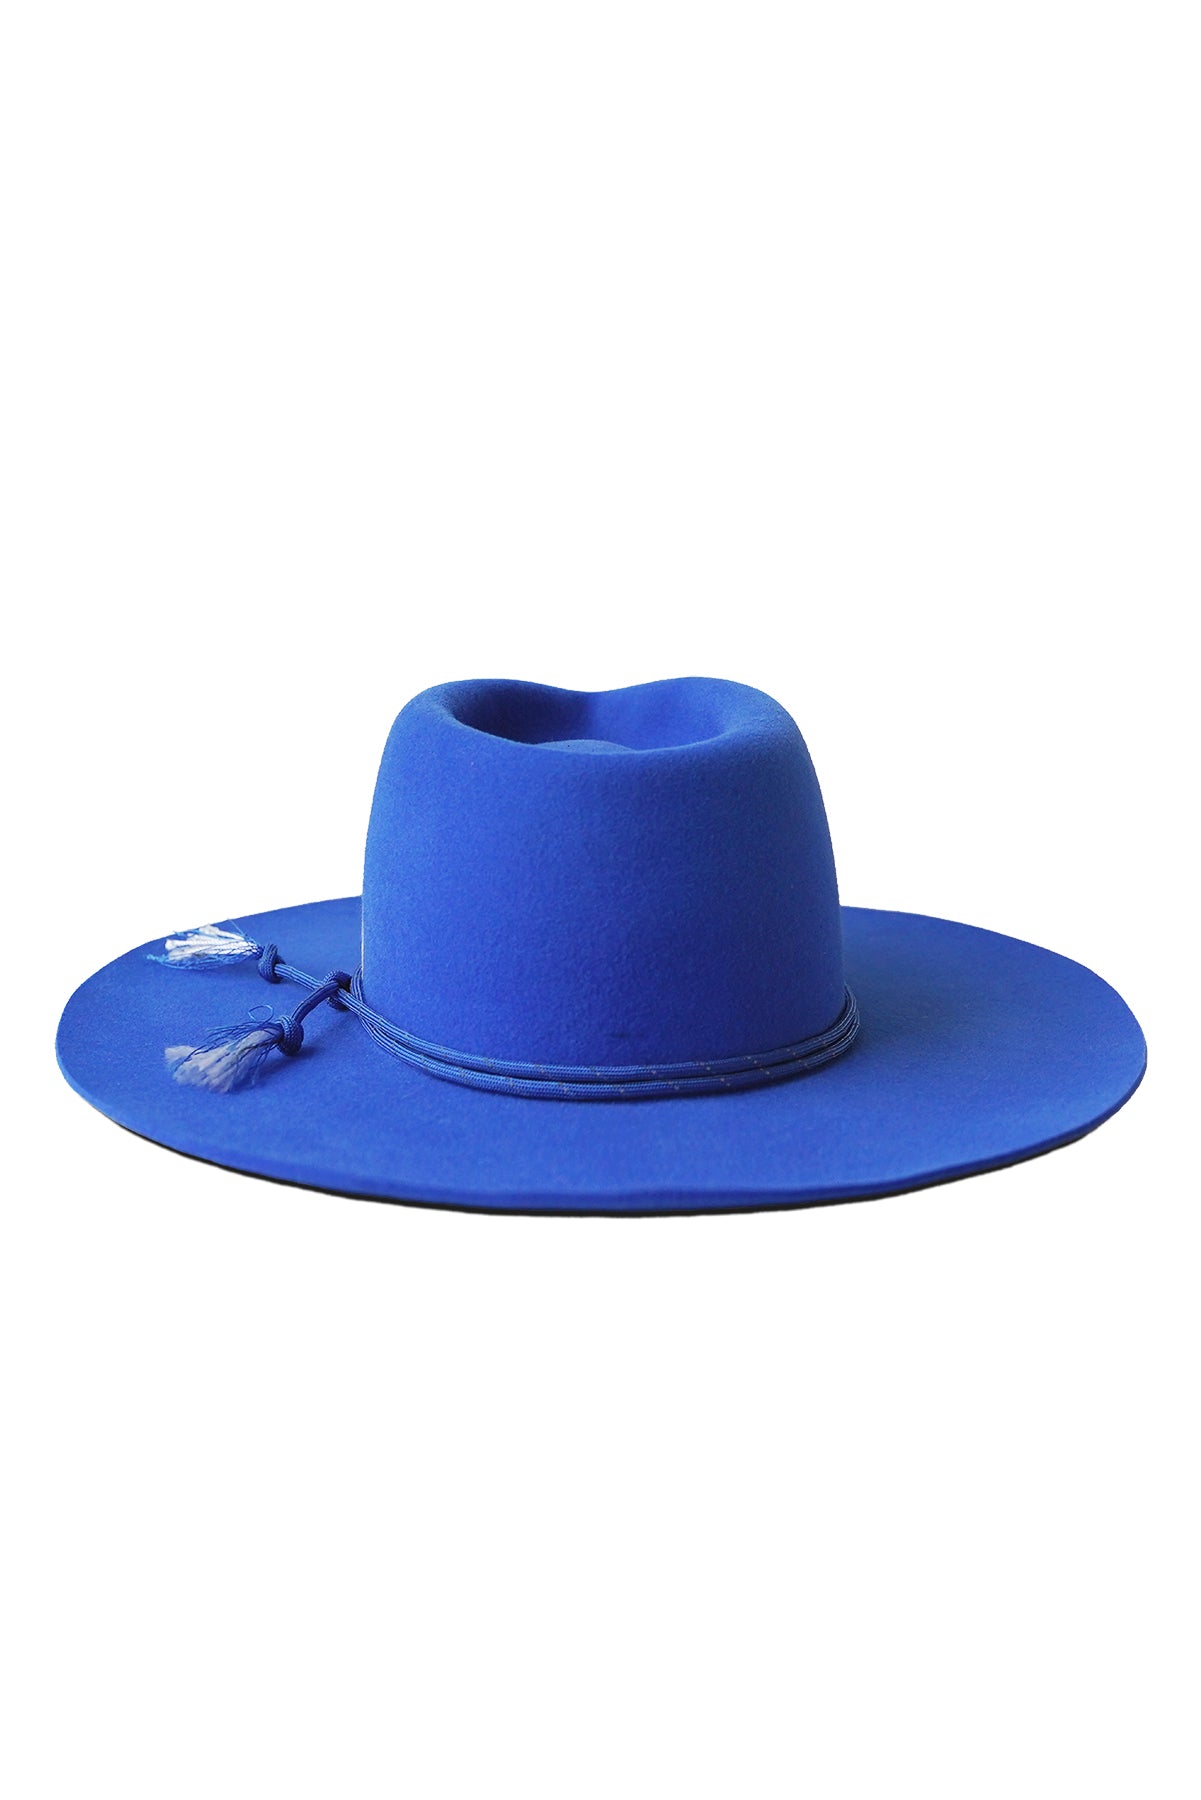 Blue fur felt fedora hat with a wide brim and paracord. Unisex hat style in various sizes and colors. We ship worldwide. Shop now. Each SoonNoon hat is handmade with unique character in Stockholm, Sweden.